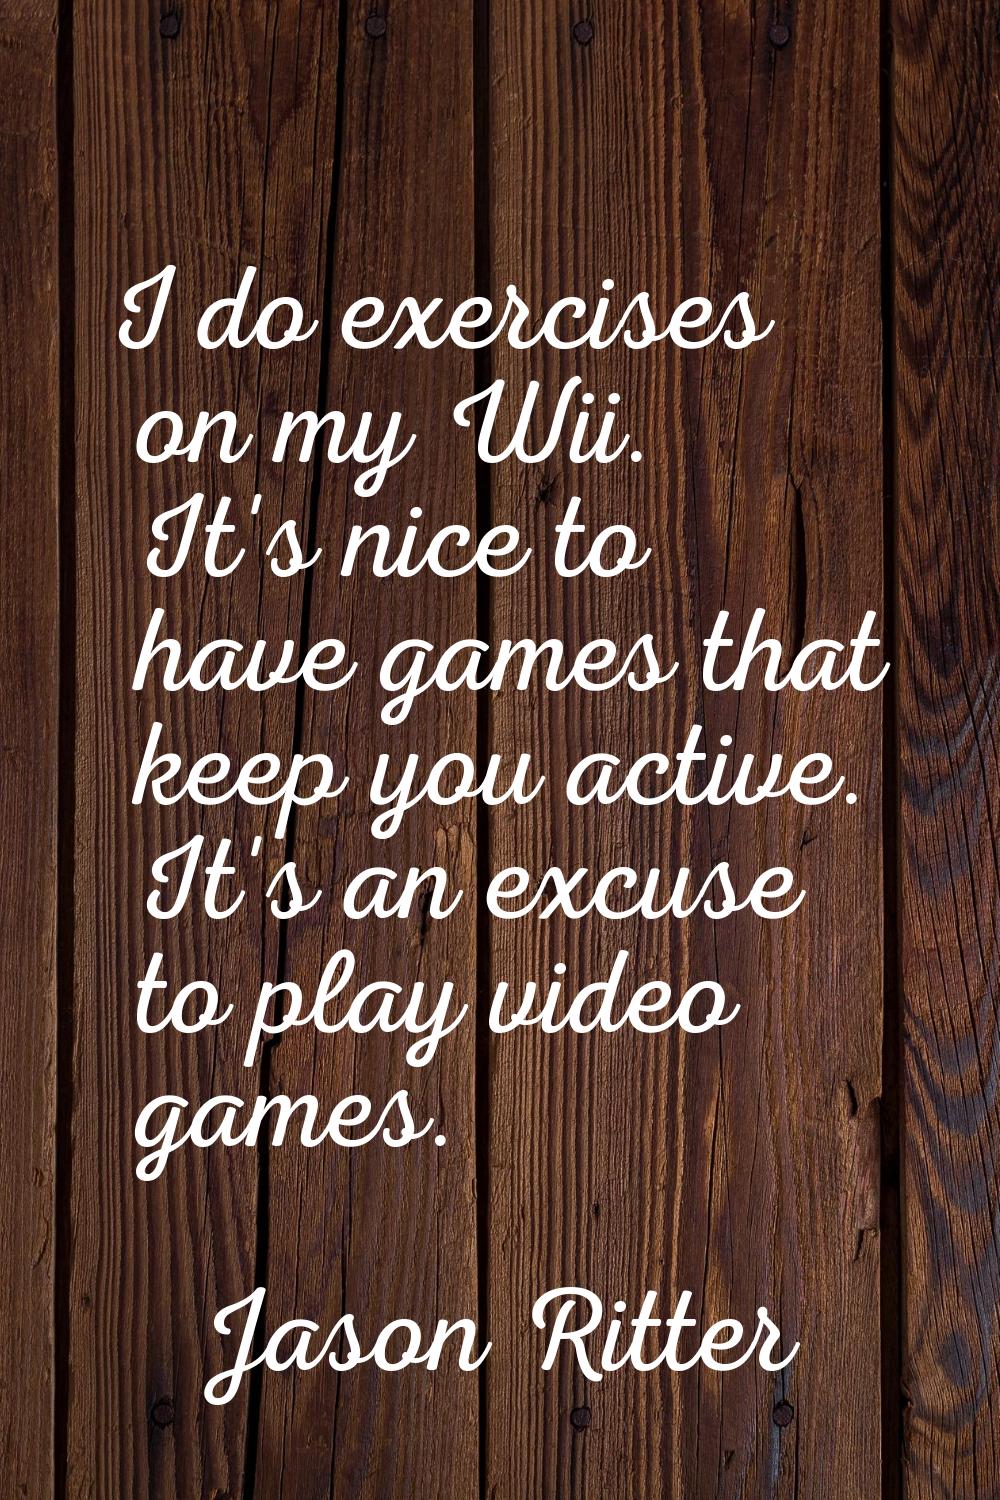 I do exercises on my Wii. It's nice to have games that keep you active. It's an excuse to play vide